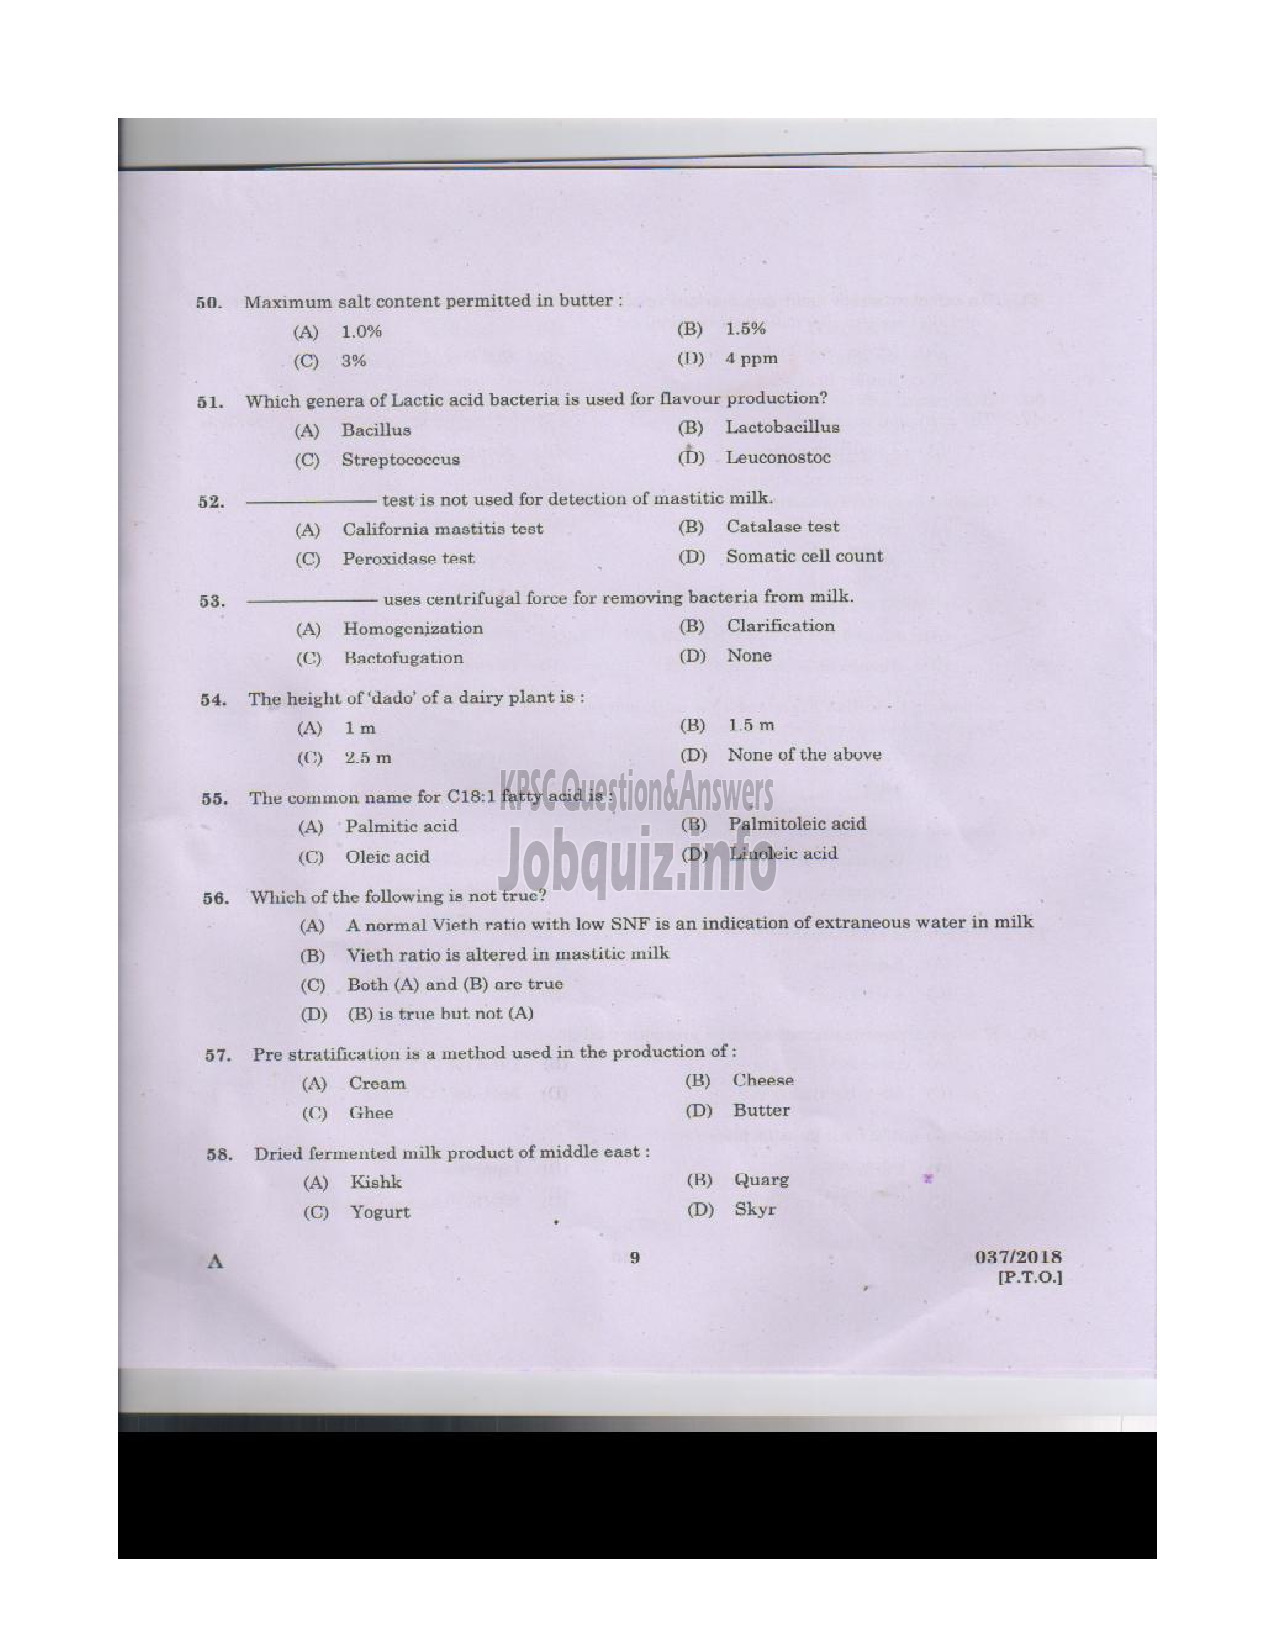 Kerala PSC Question Paper - VOCATIONAL INSTRUCTOR IN DAIRYING MILK PRODUCTS VOCATIONAL HIGHER SECONDARY EDUCATION-8